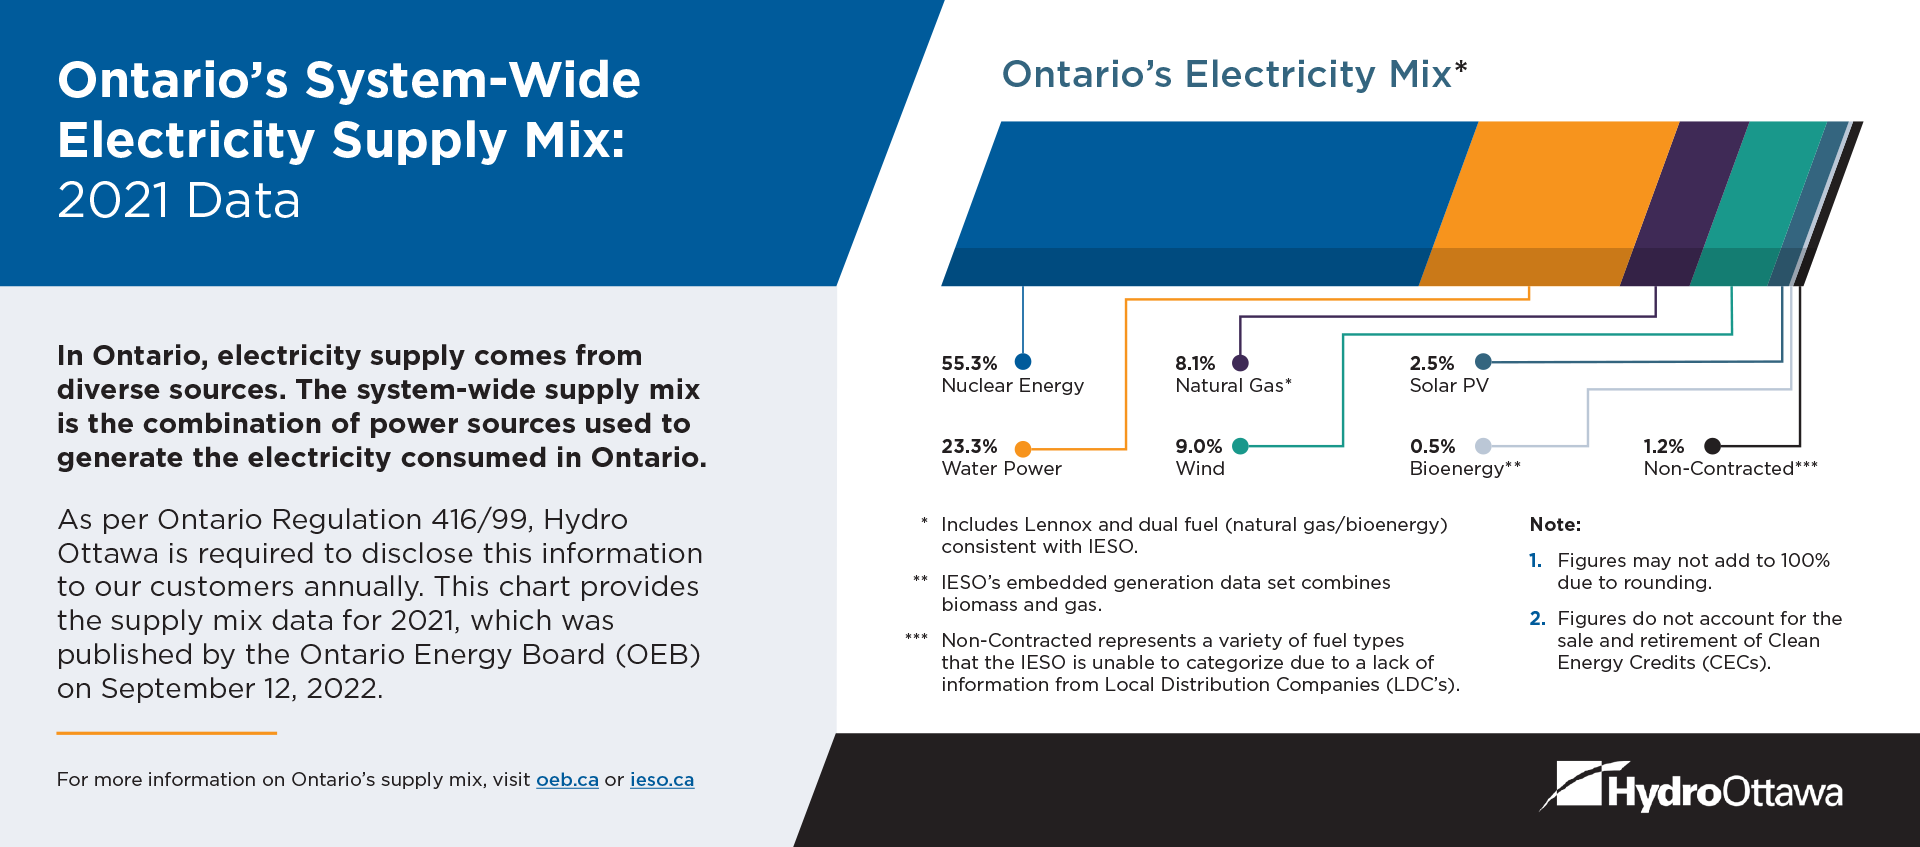 Ontario’s System-Wide Electricity Supply Mix: 2021 Data